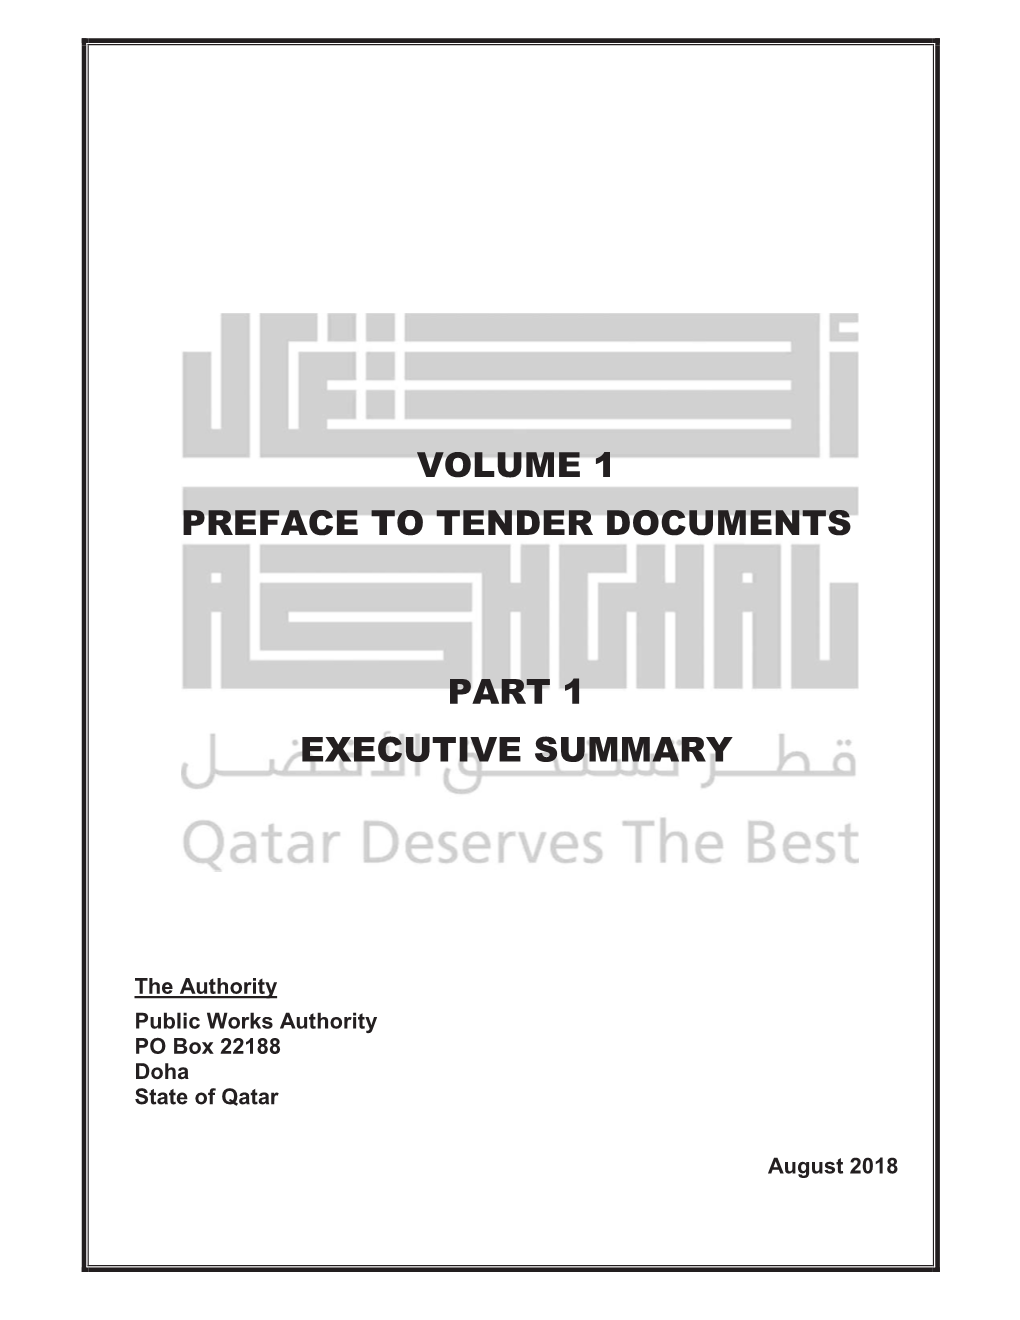 Volume 1 Preface to Tender Documents Part 1 Executive